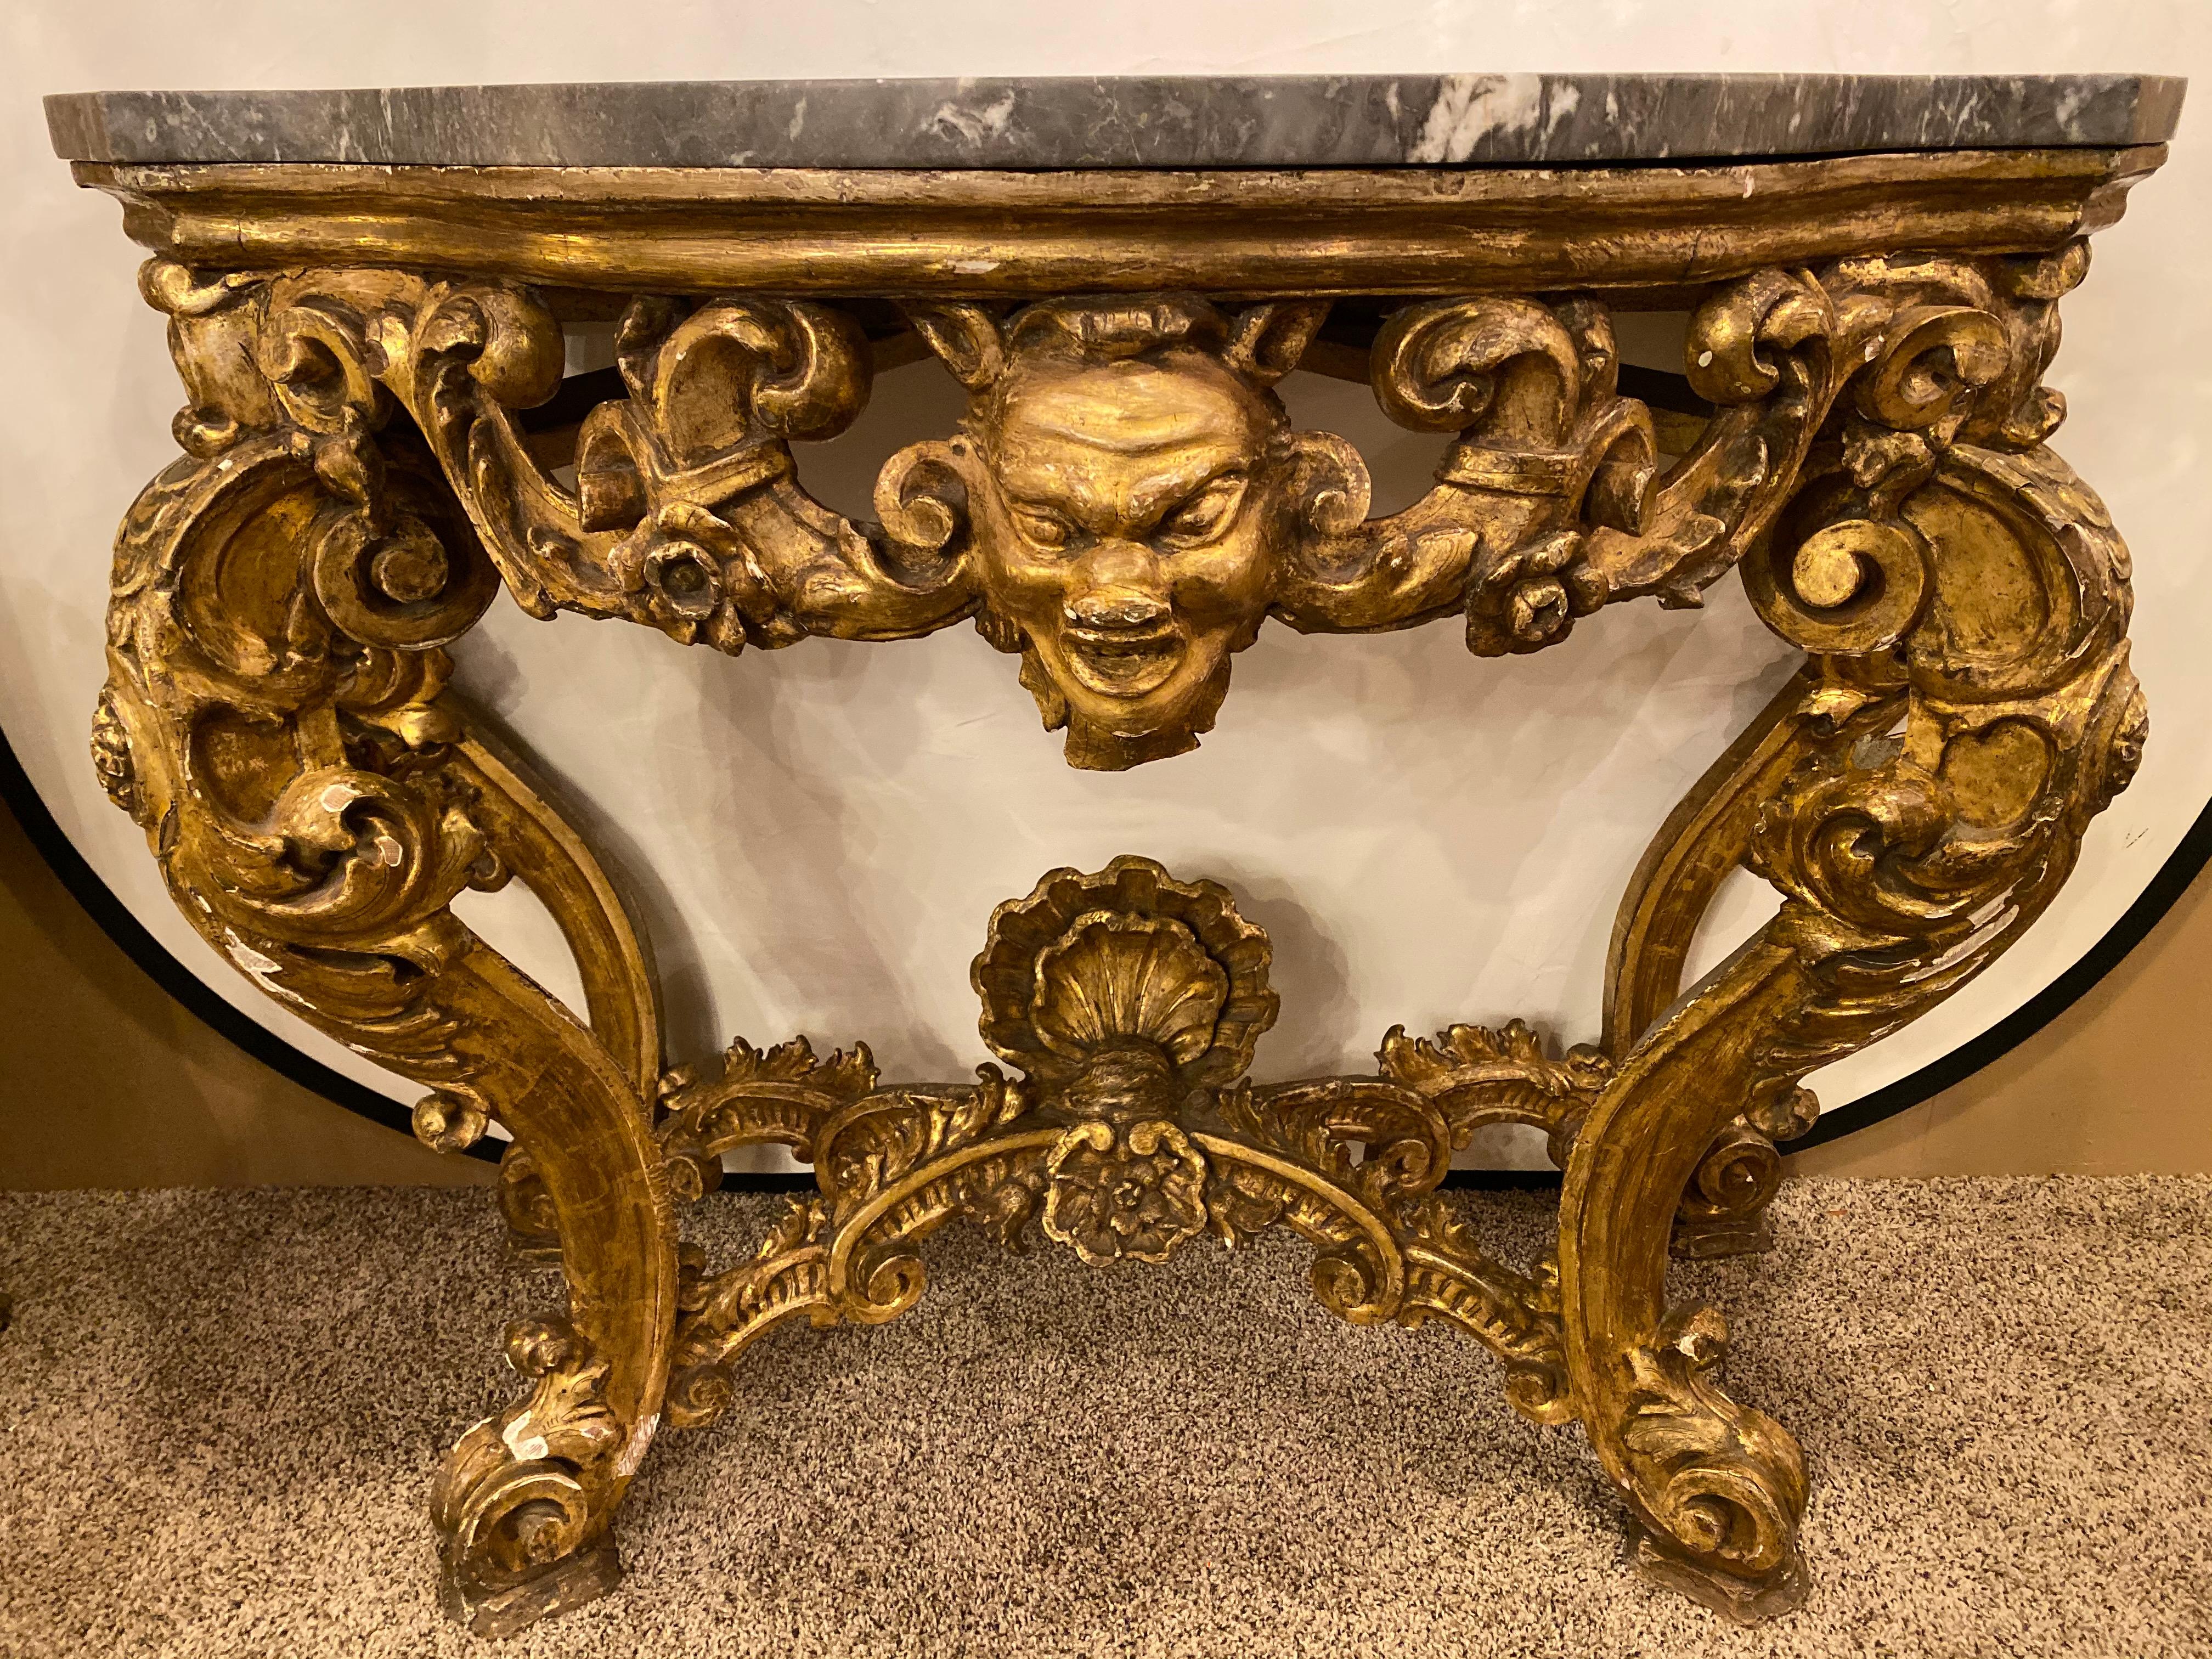 19th century Venetian gilt gold console table having a grey marble top. This ornately carved console or serving table is simply stunning and was certainly crafted to make a statement in any room it sits in. The double serpentine form case with a